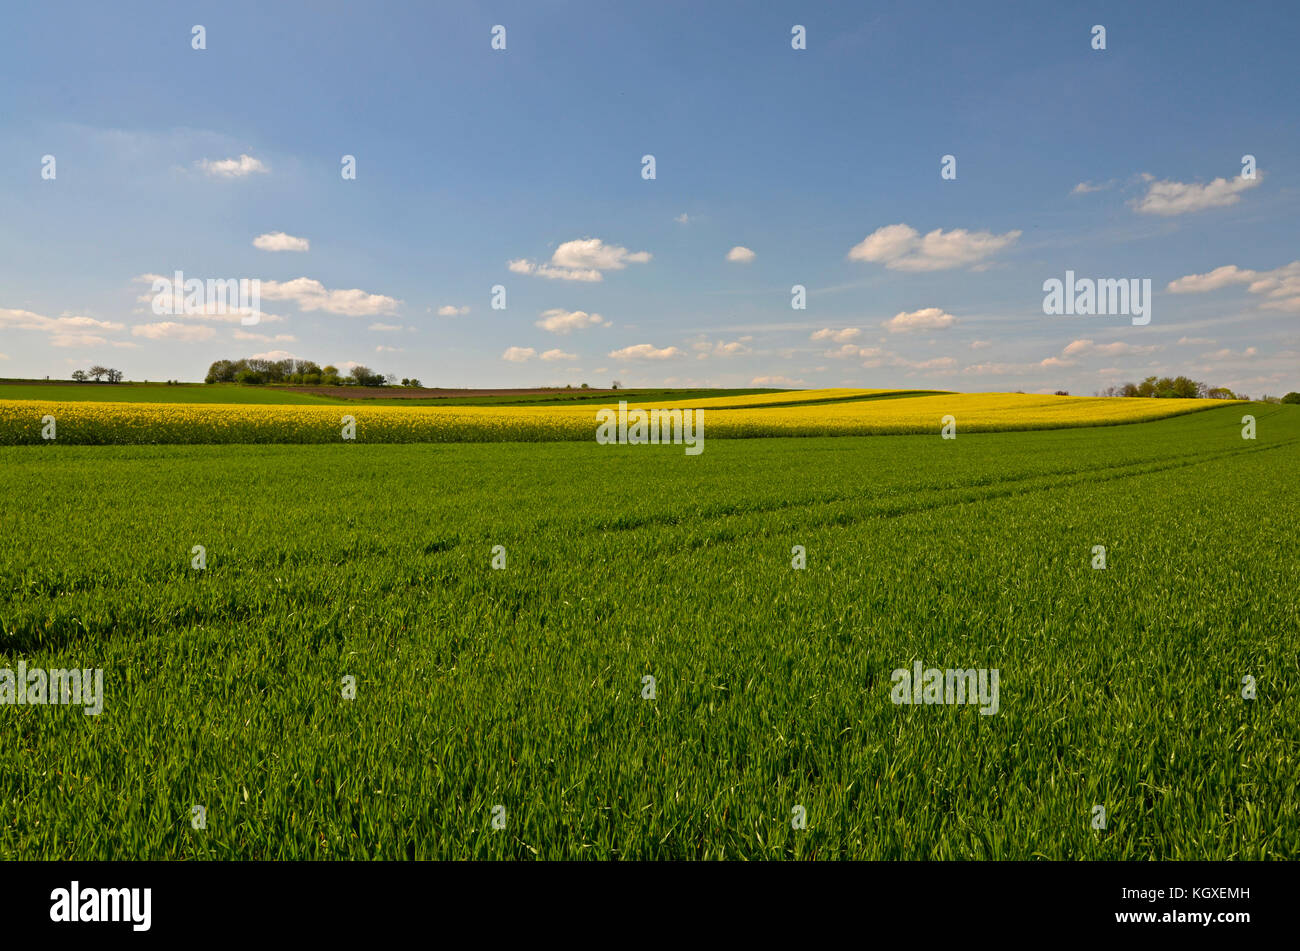 A rural landscape: a feld of unripe wheat with fields of yellow canola plant in the background. Picturesque blue sky with scattered clouds Stock Photo